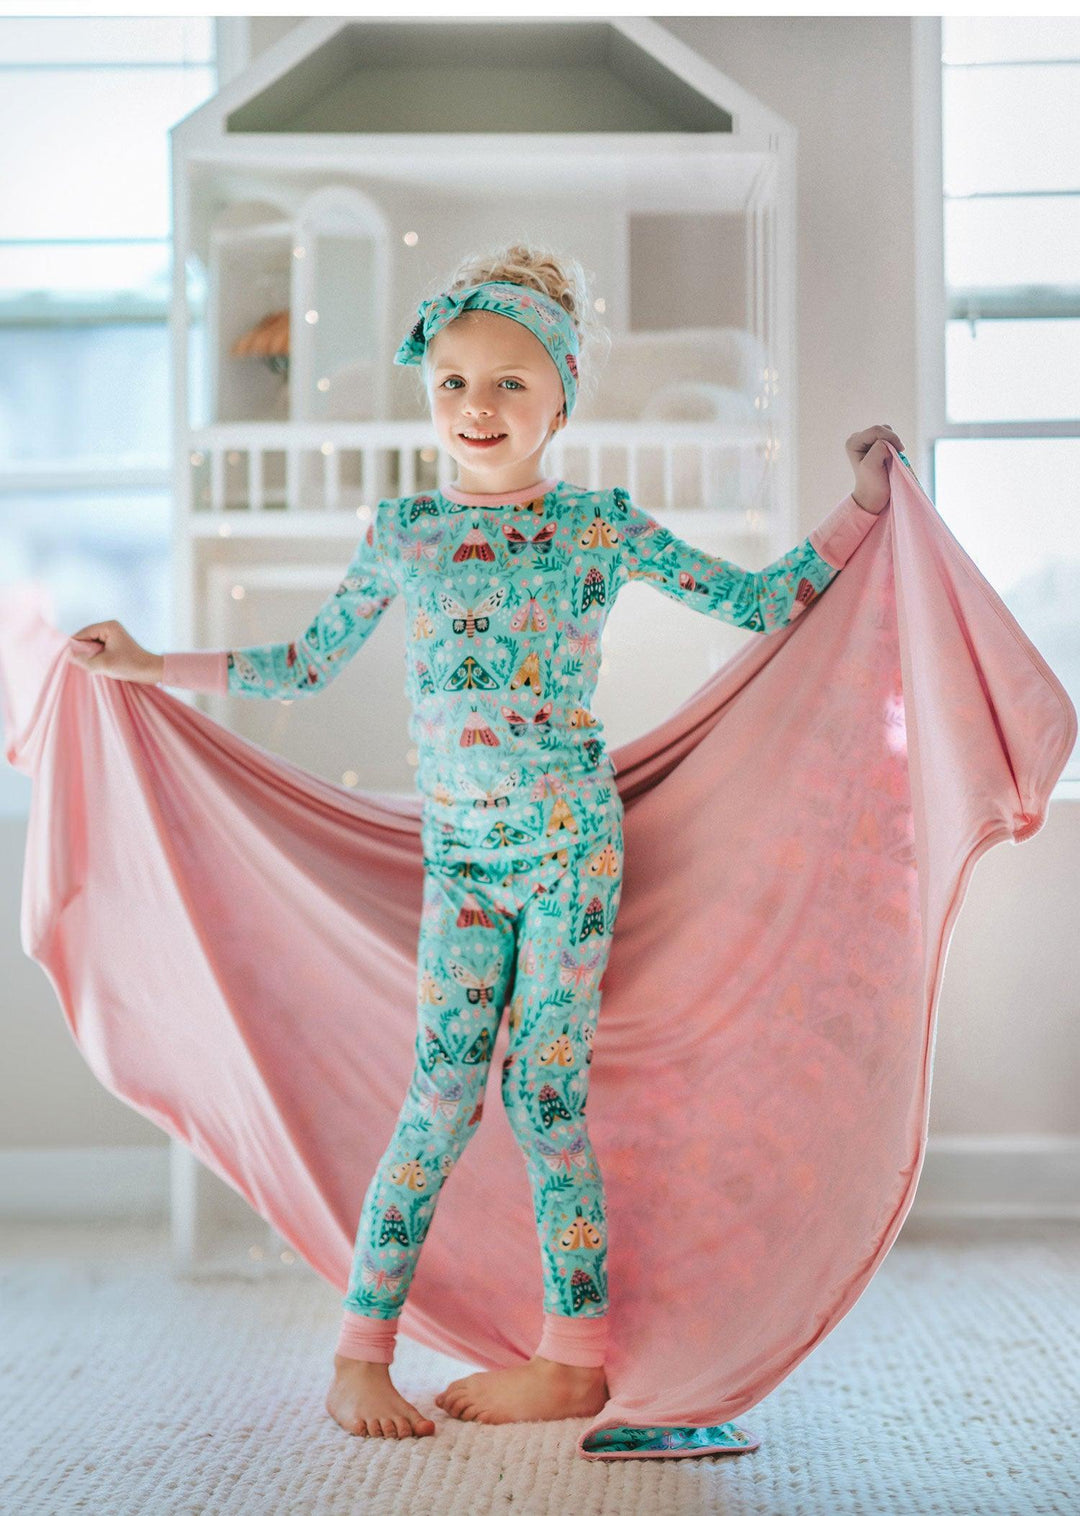 A Parent’s Guide to Choosing the Best Fabric for Baby Clothes - Sophia Rose Children's Boutique